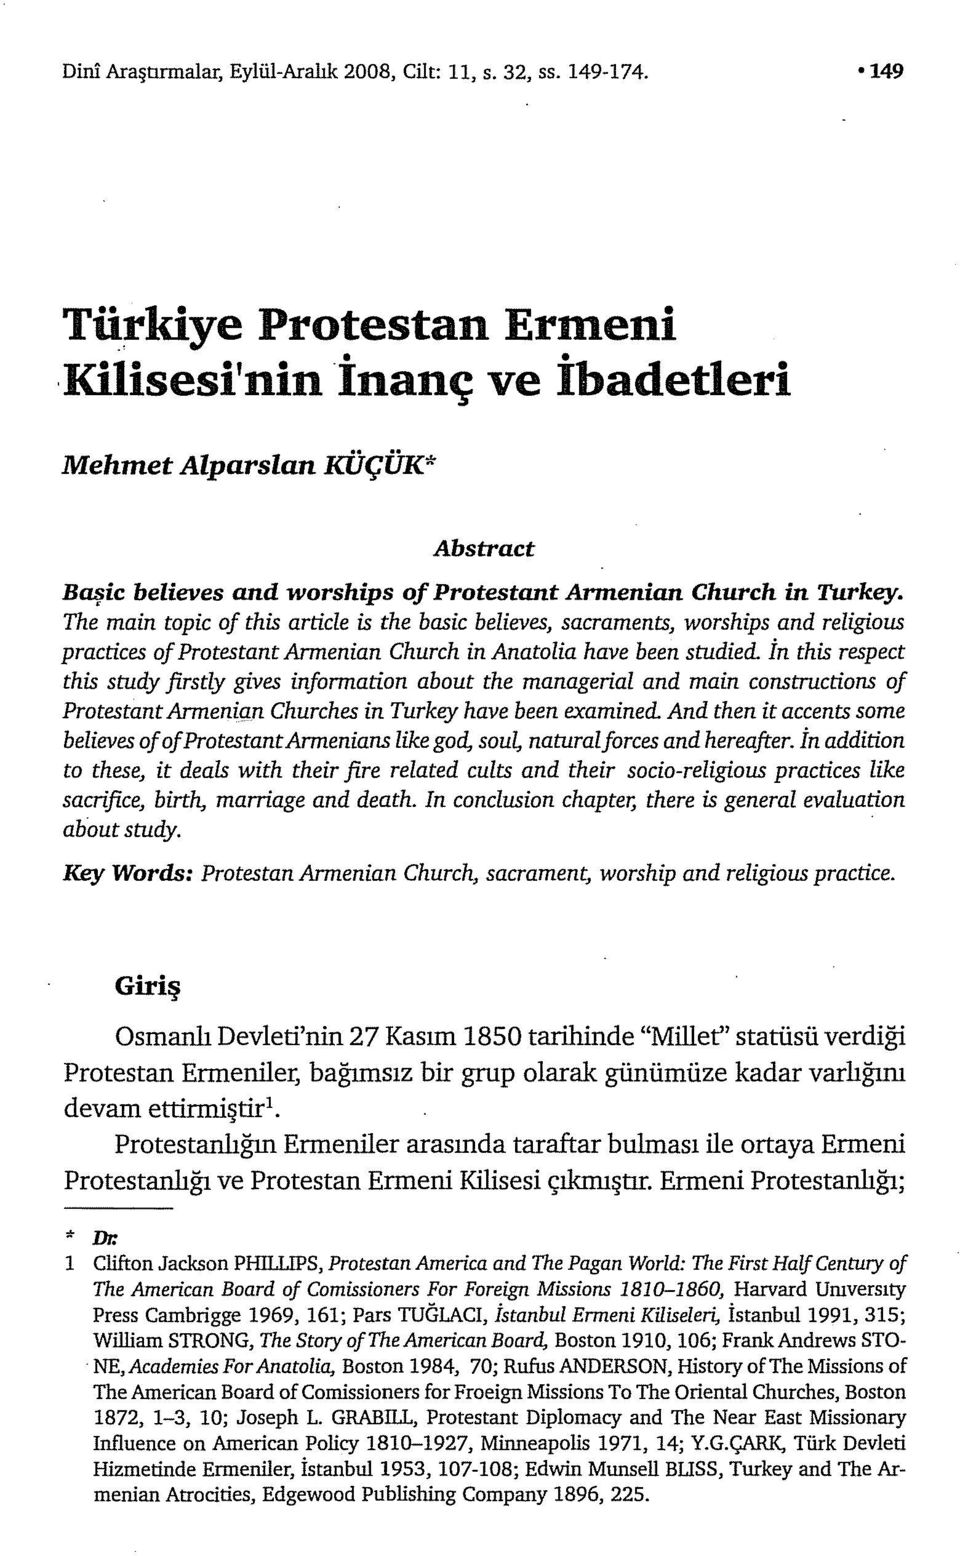 The main topic of this article is the basic believes, sacraments, worships and religious practices of Protestant Armenian Church in Anatolia have been studied.